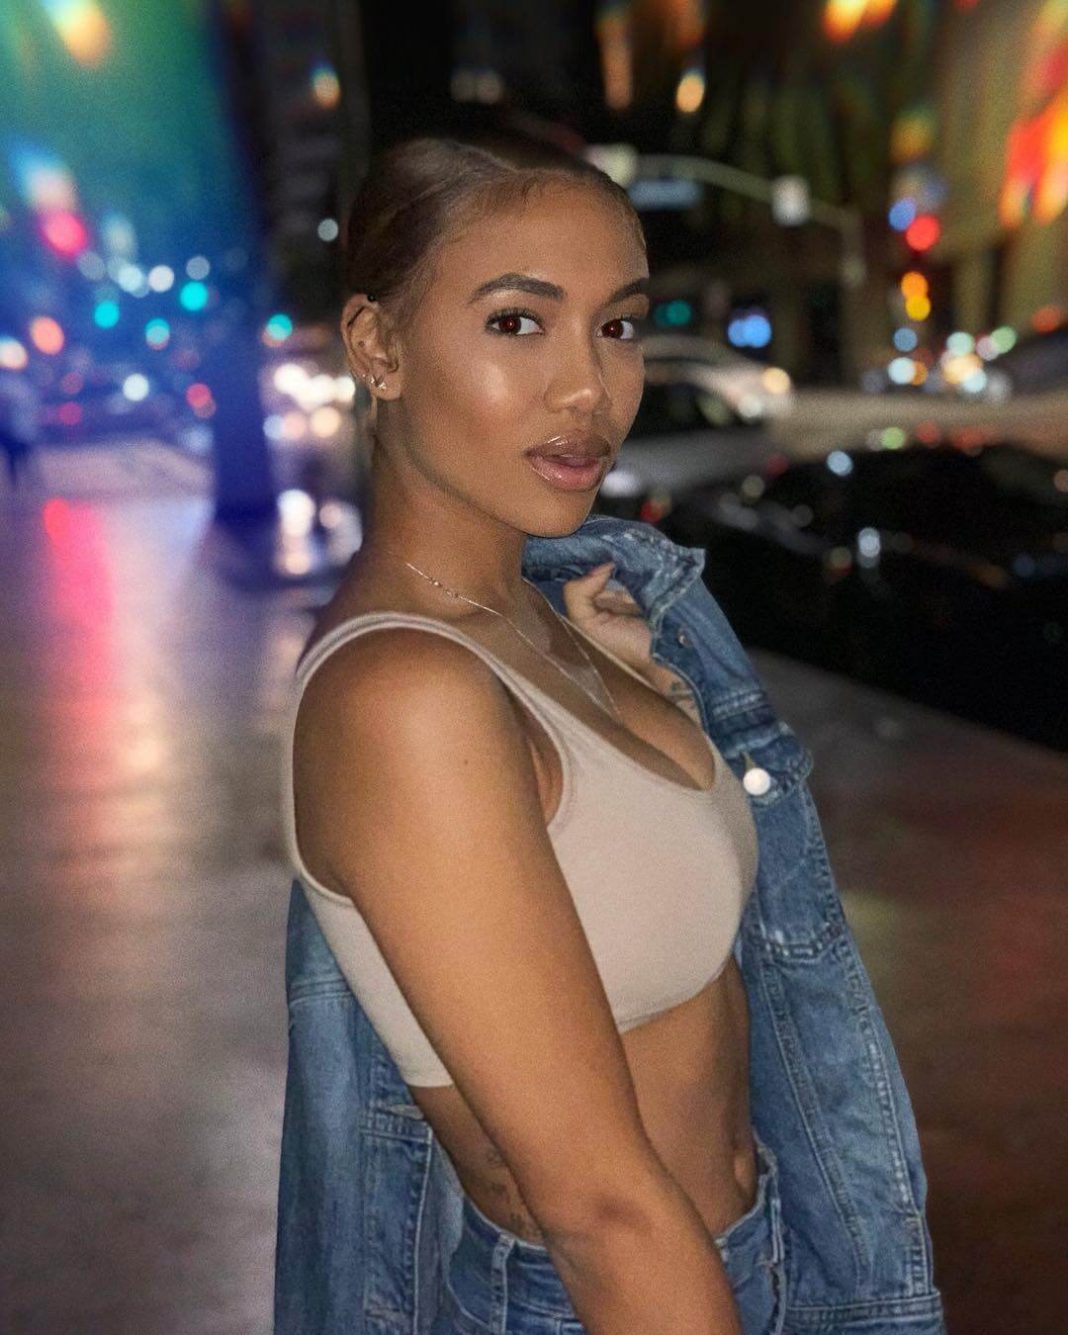 51 Paige Hurd Nude Pictures Which Makes Her An Enigmatic Glamor Quotient 12